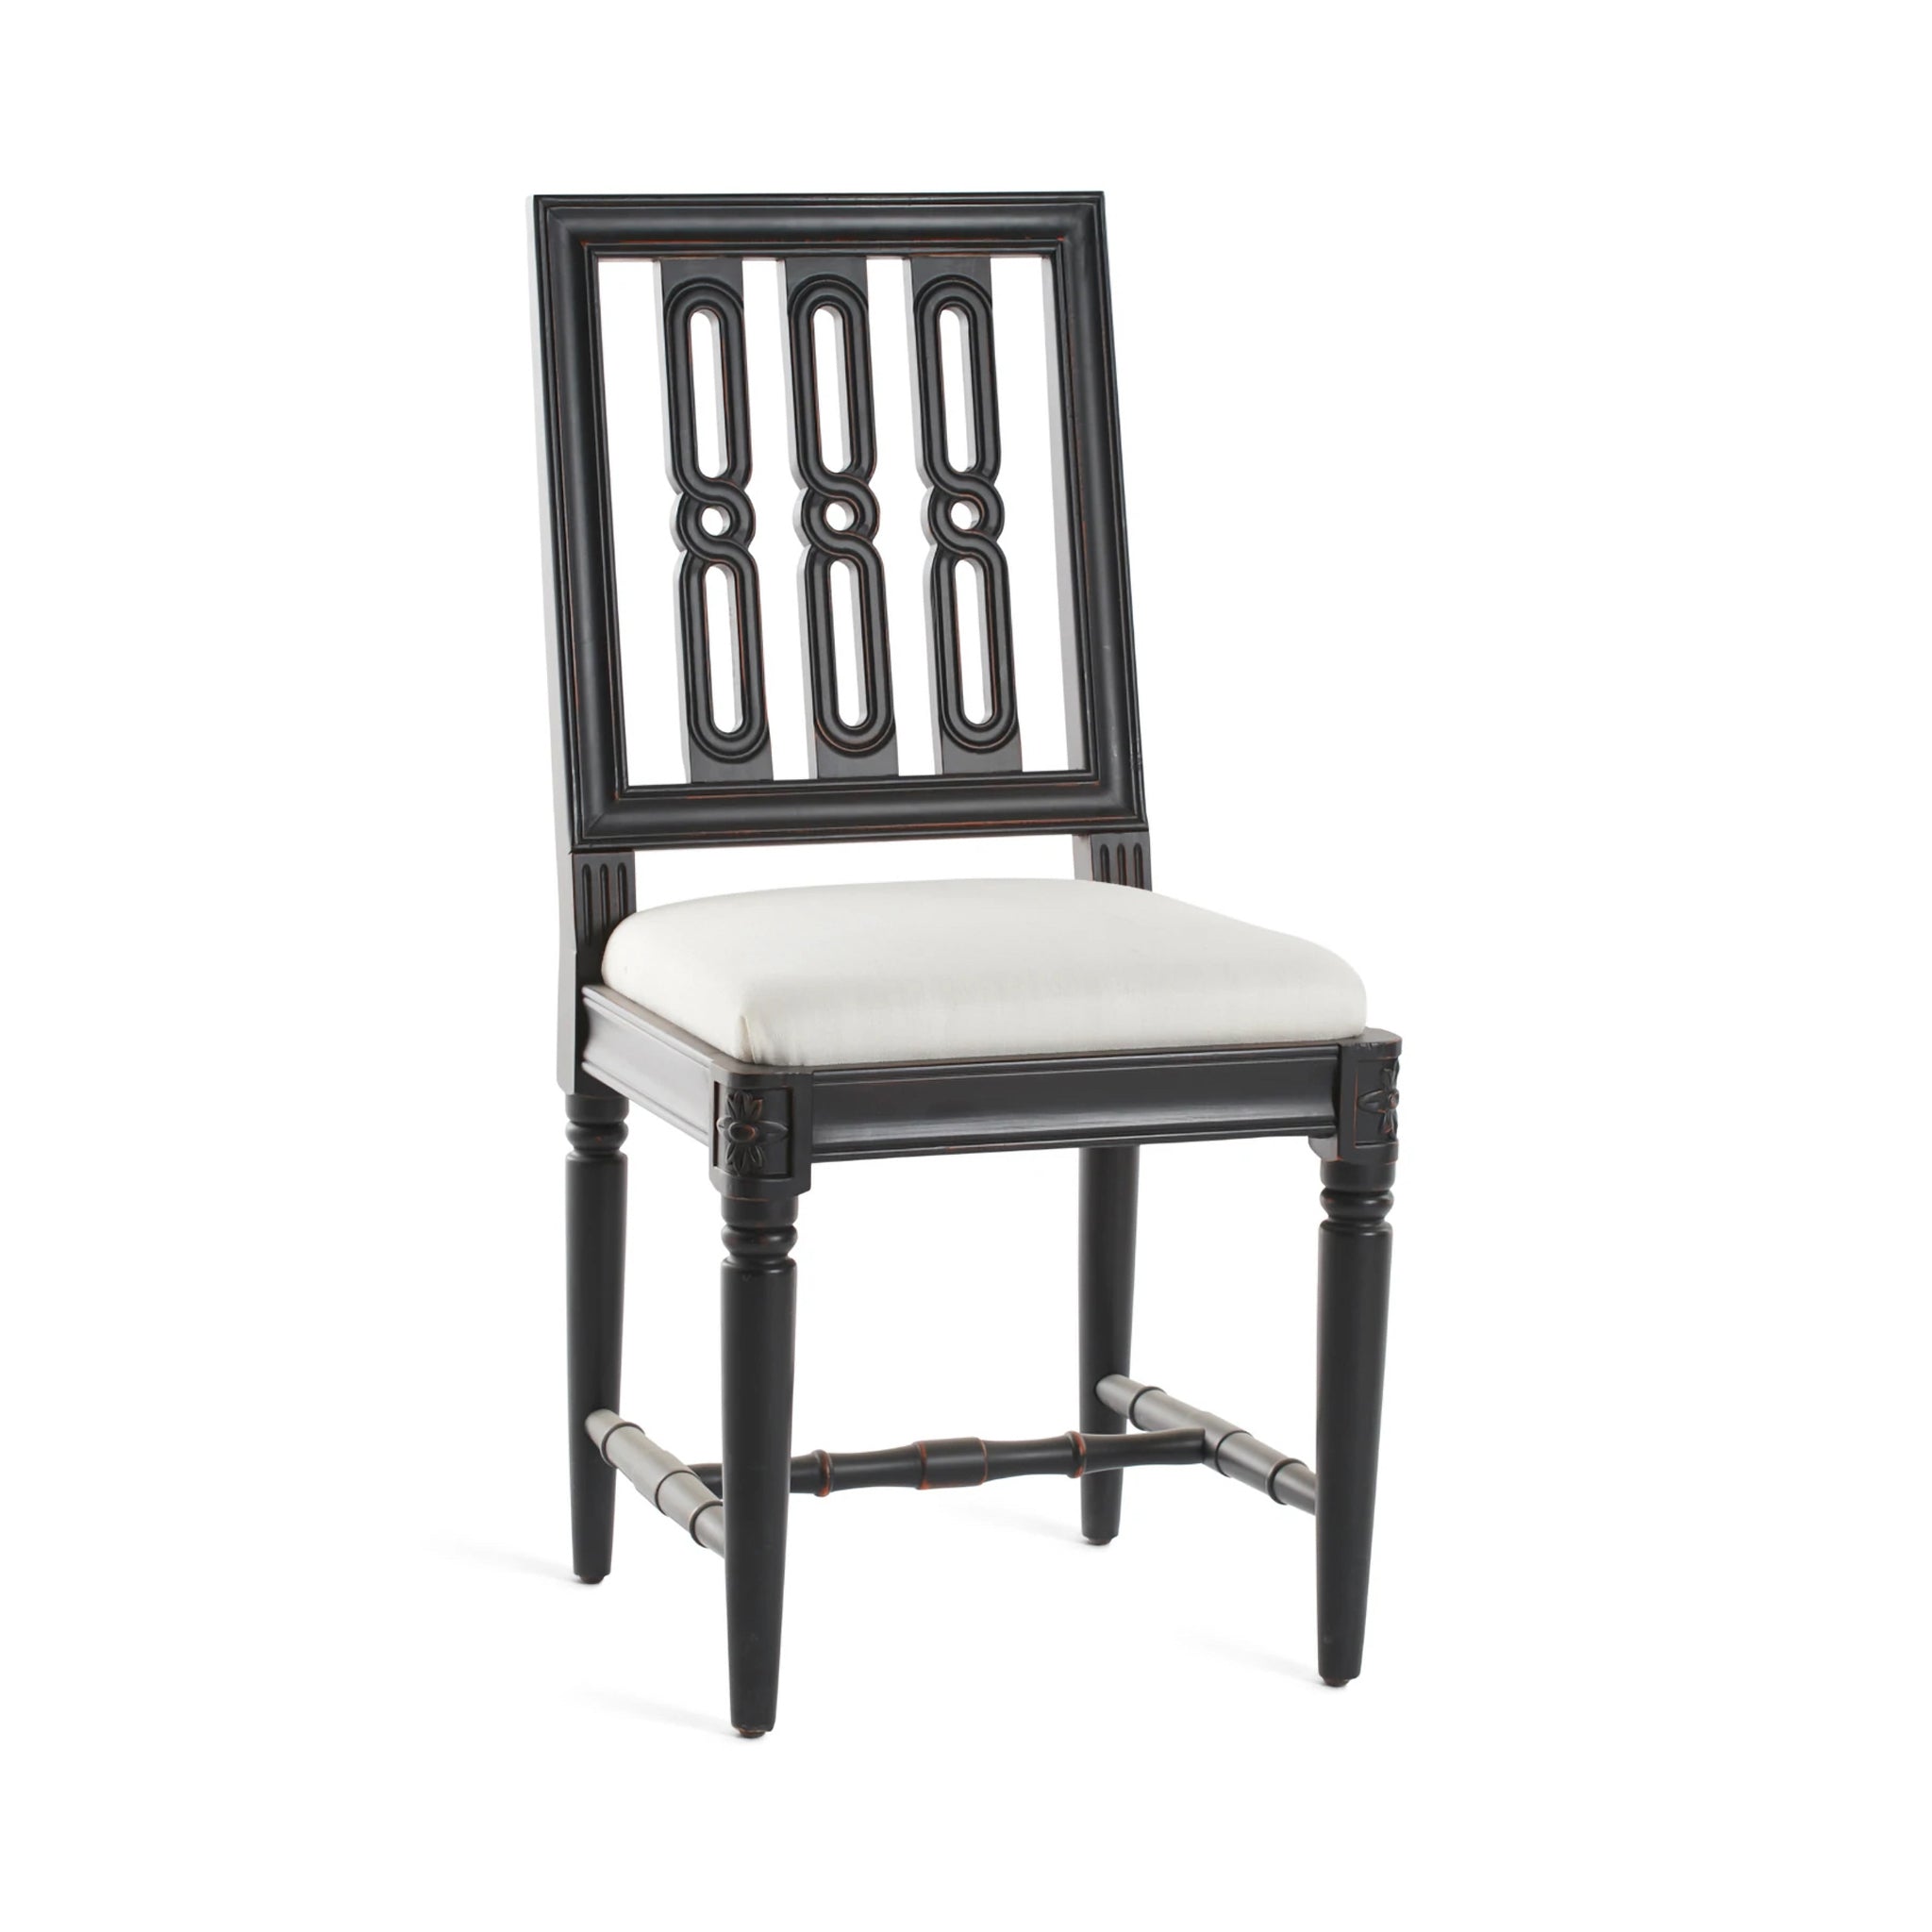 Front View of the Gustavian Dining Chair (Color - Black) on a White Background